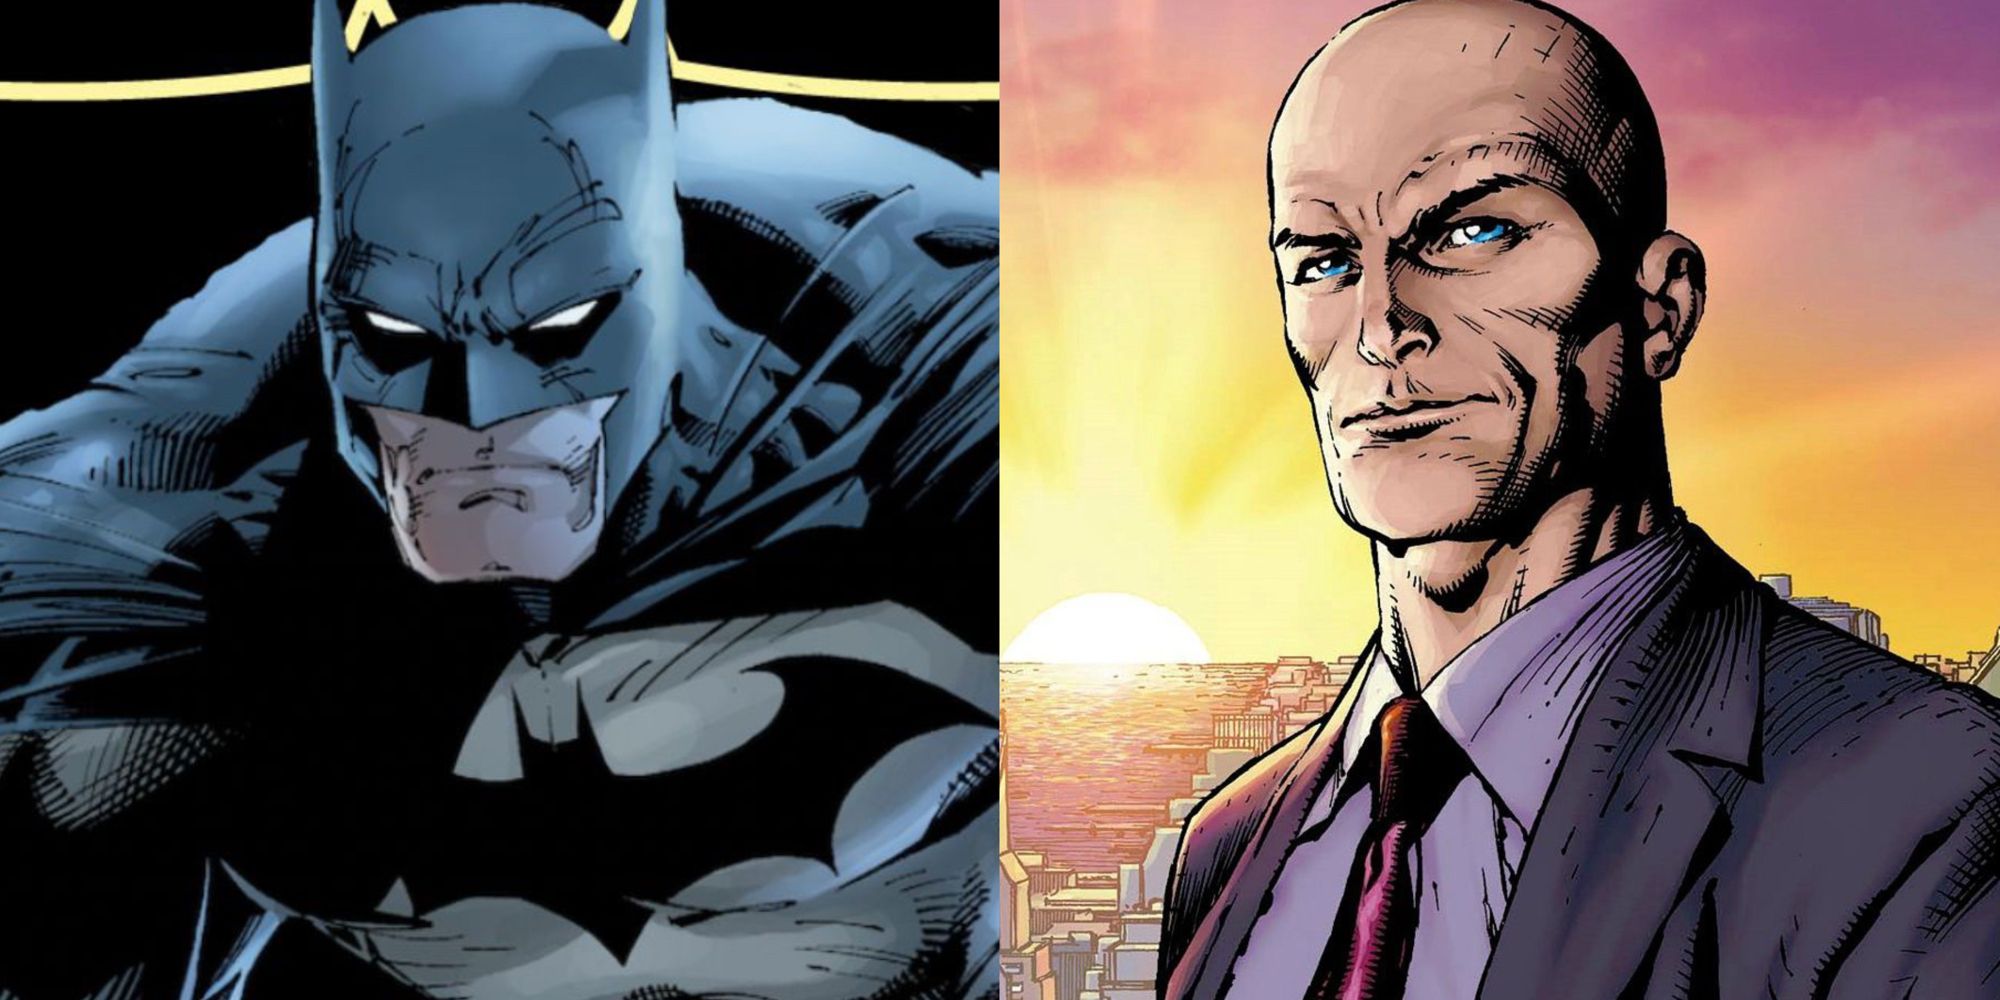 batman and lex luthor in a two panel image